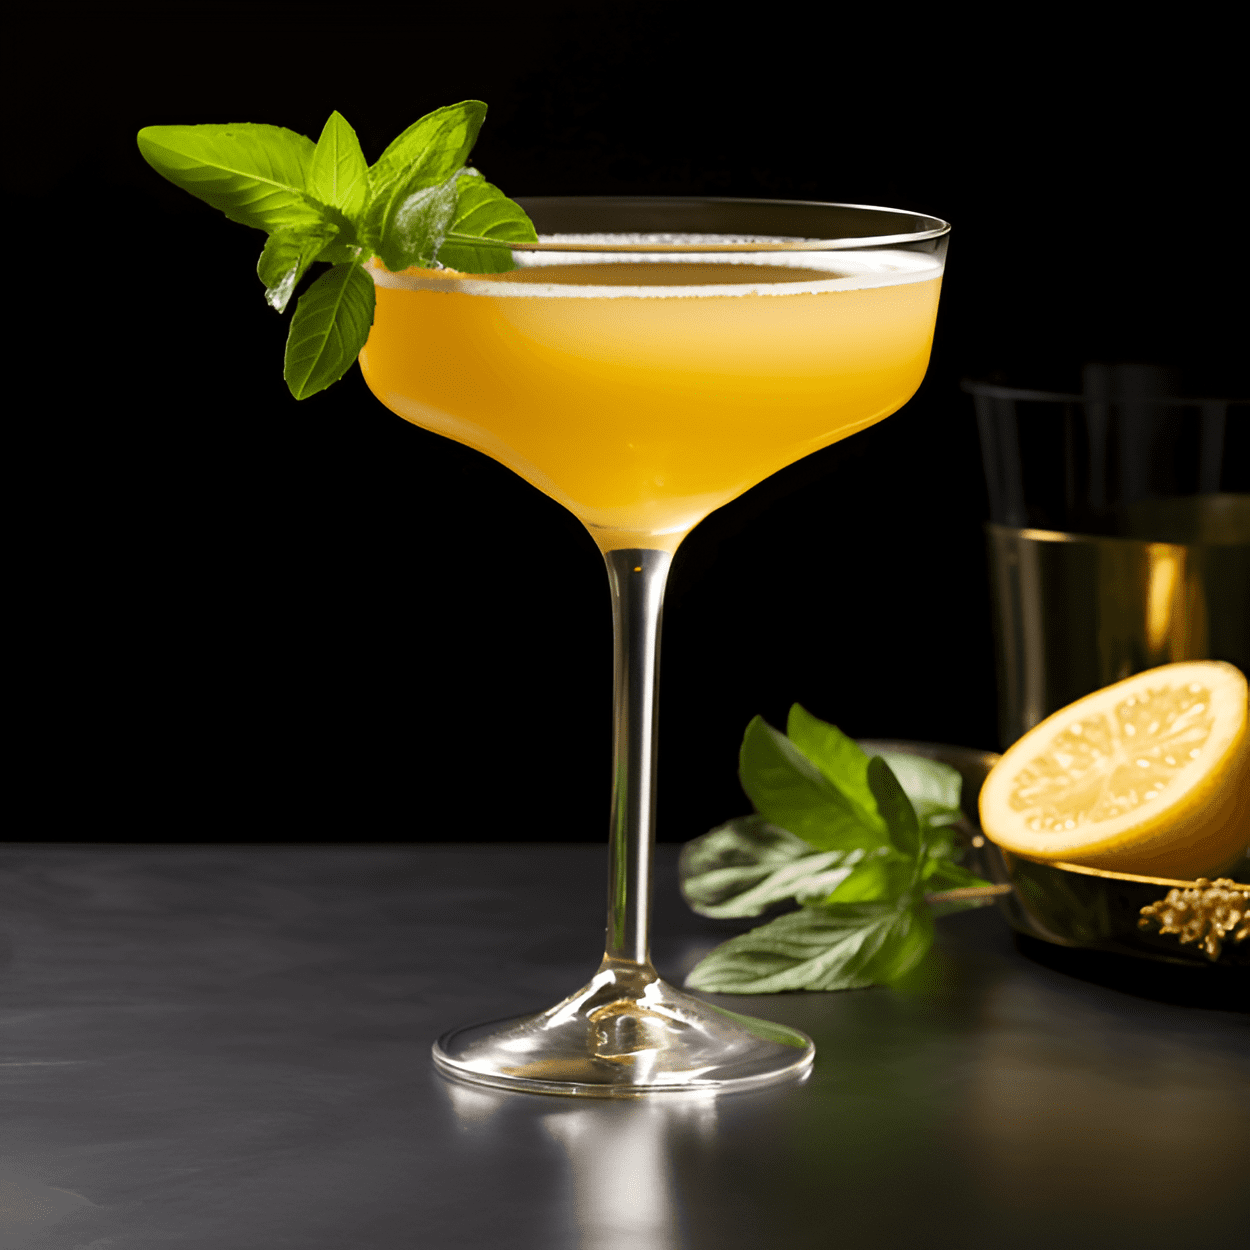 Mavi Cocktail Recipe - The Mavi cocktail has a unique, tropical flavor. It's sweet, with a hint of tartness, and has a deep, earthy undertone from the mavi bark. The drink is refreshing and light, making it perfect for a hot summer day.